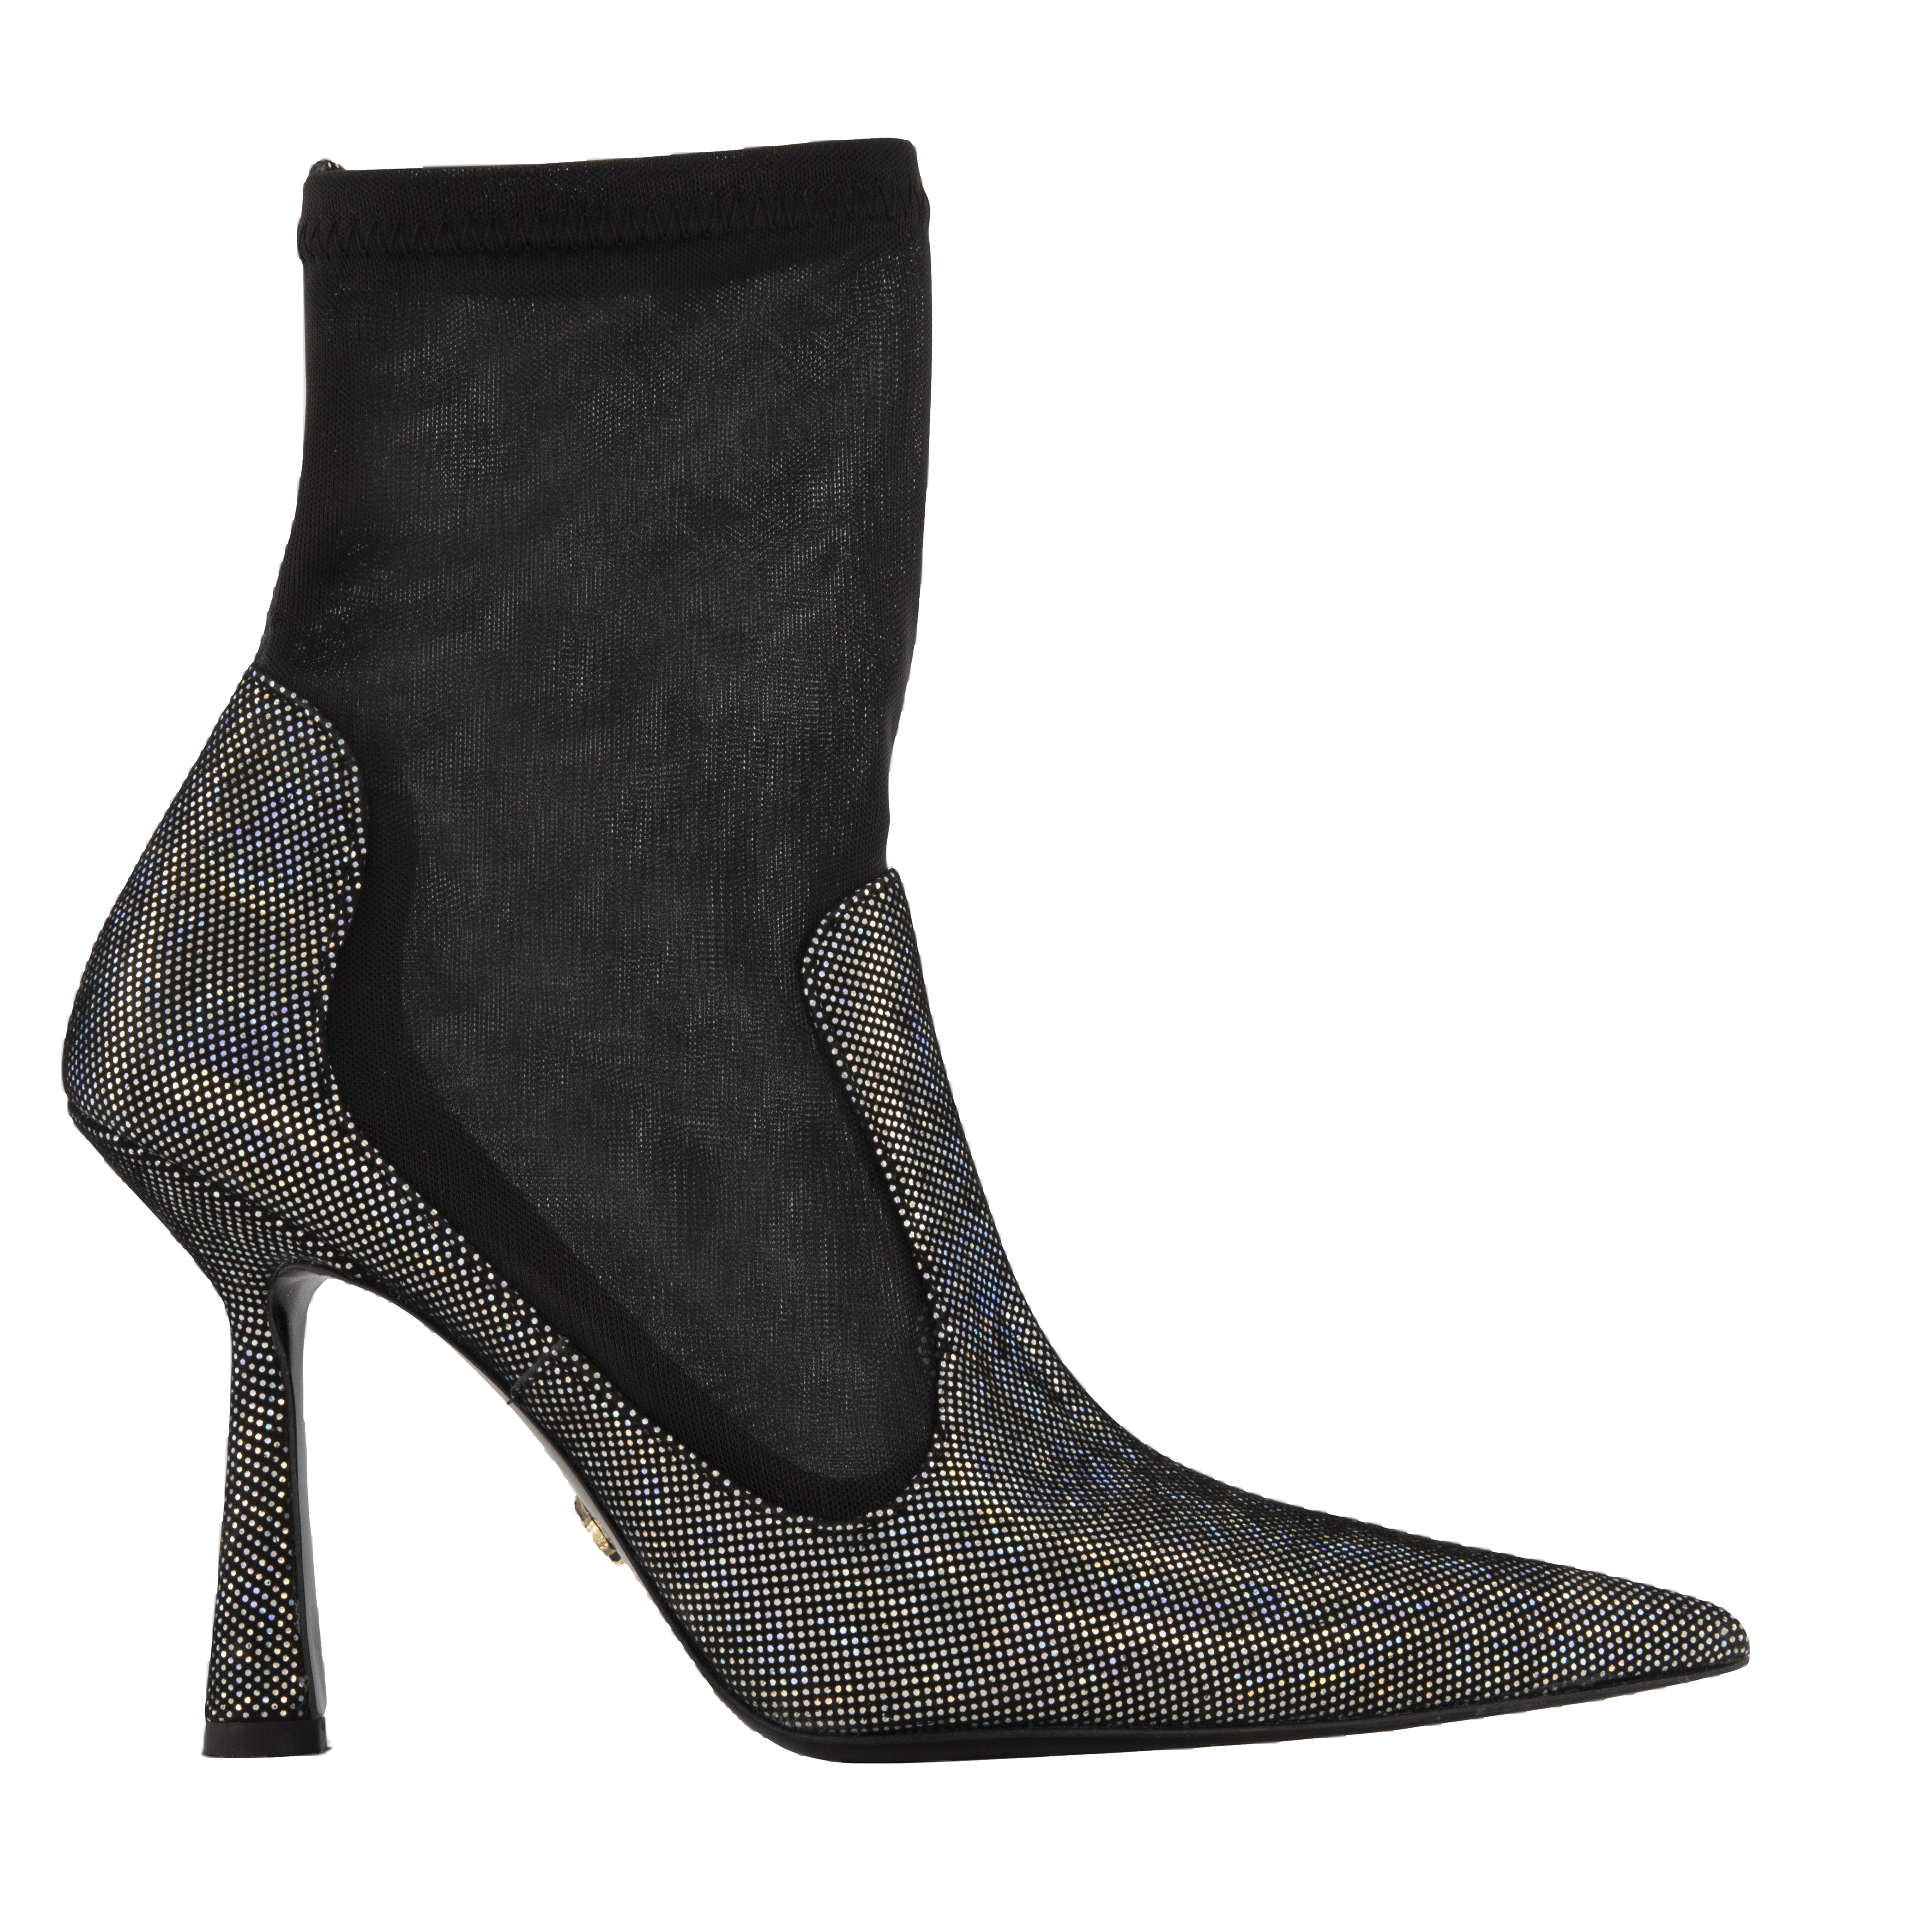 Atana Anna Boot 95 Hologram Suede In Black